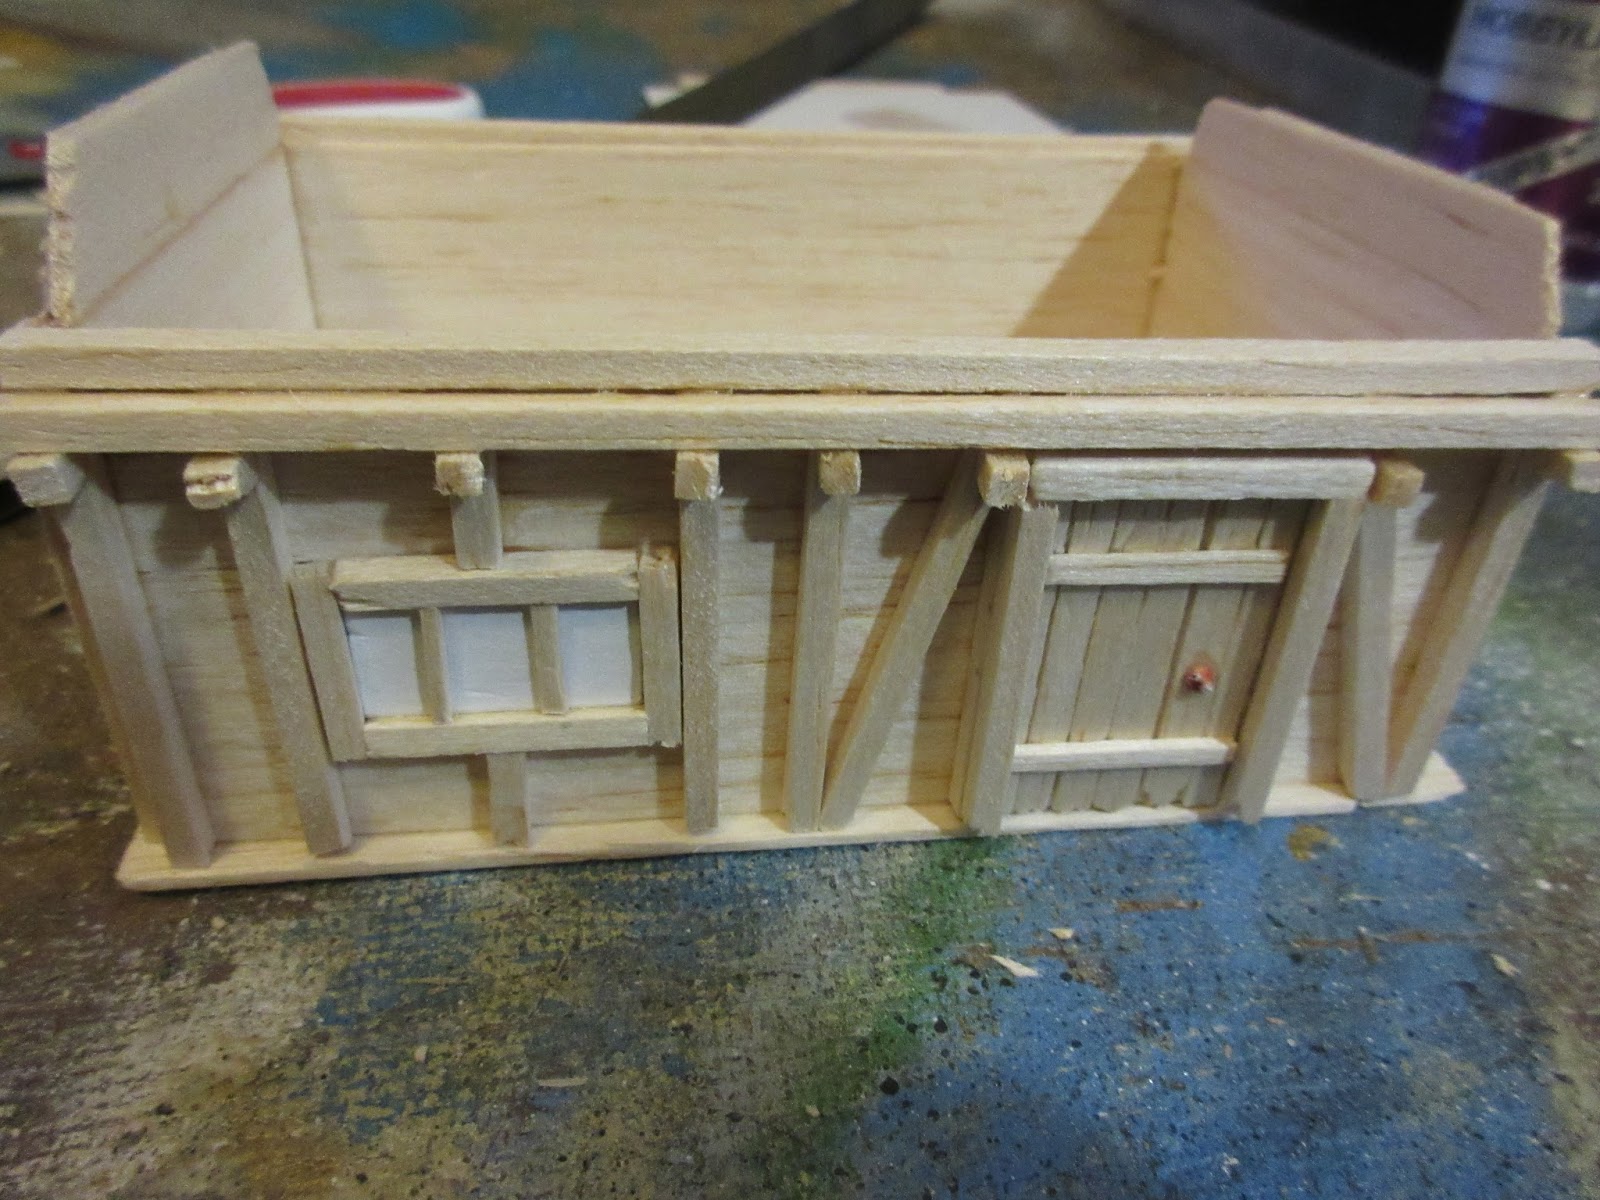 Mars Miniatures Cabin In The Woods Making A Balsa Wood House